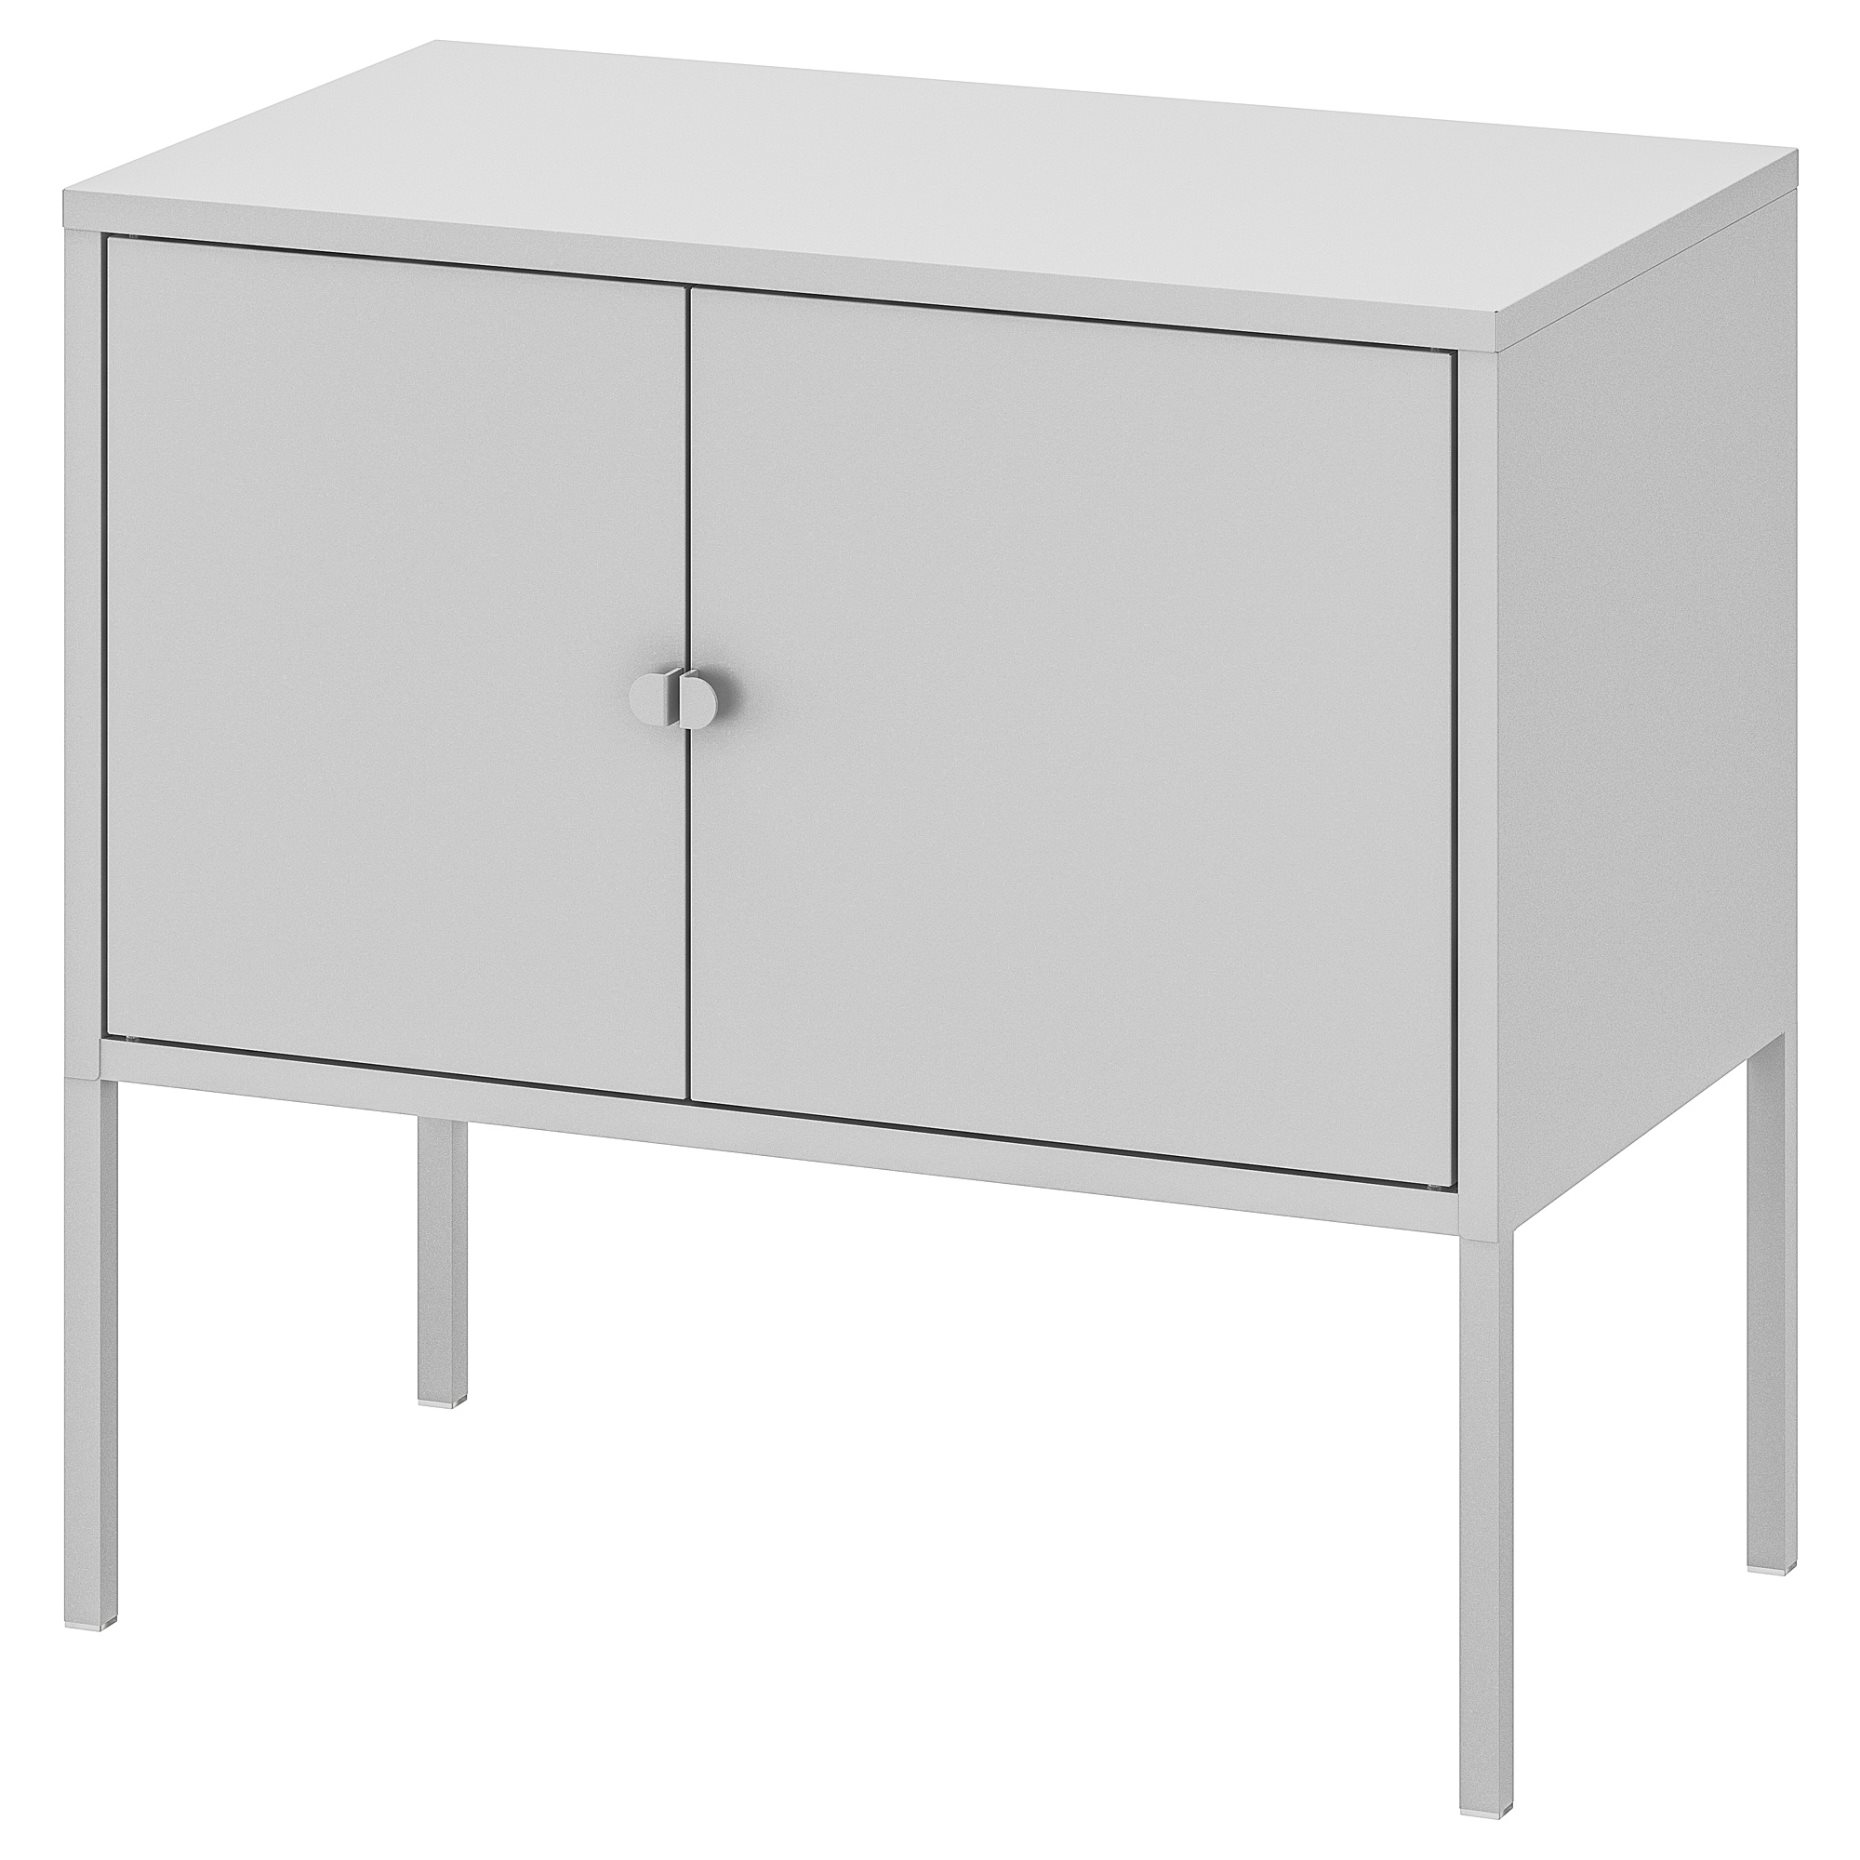 LIXHULT, cabinet, 703.286.69